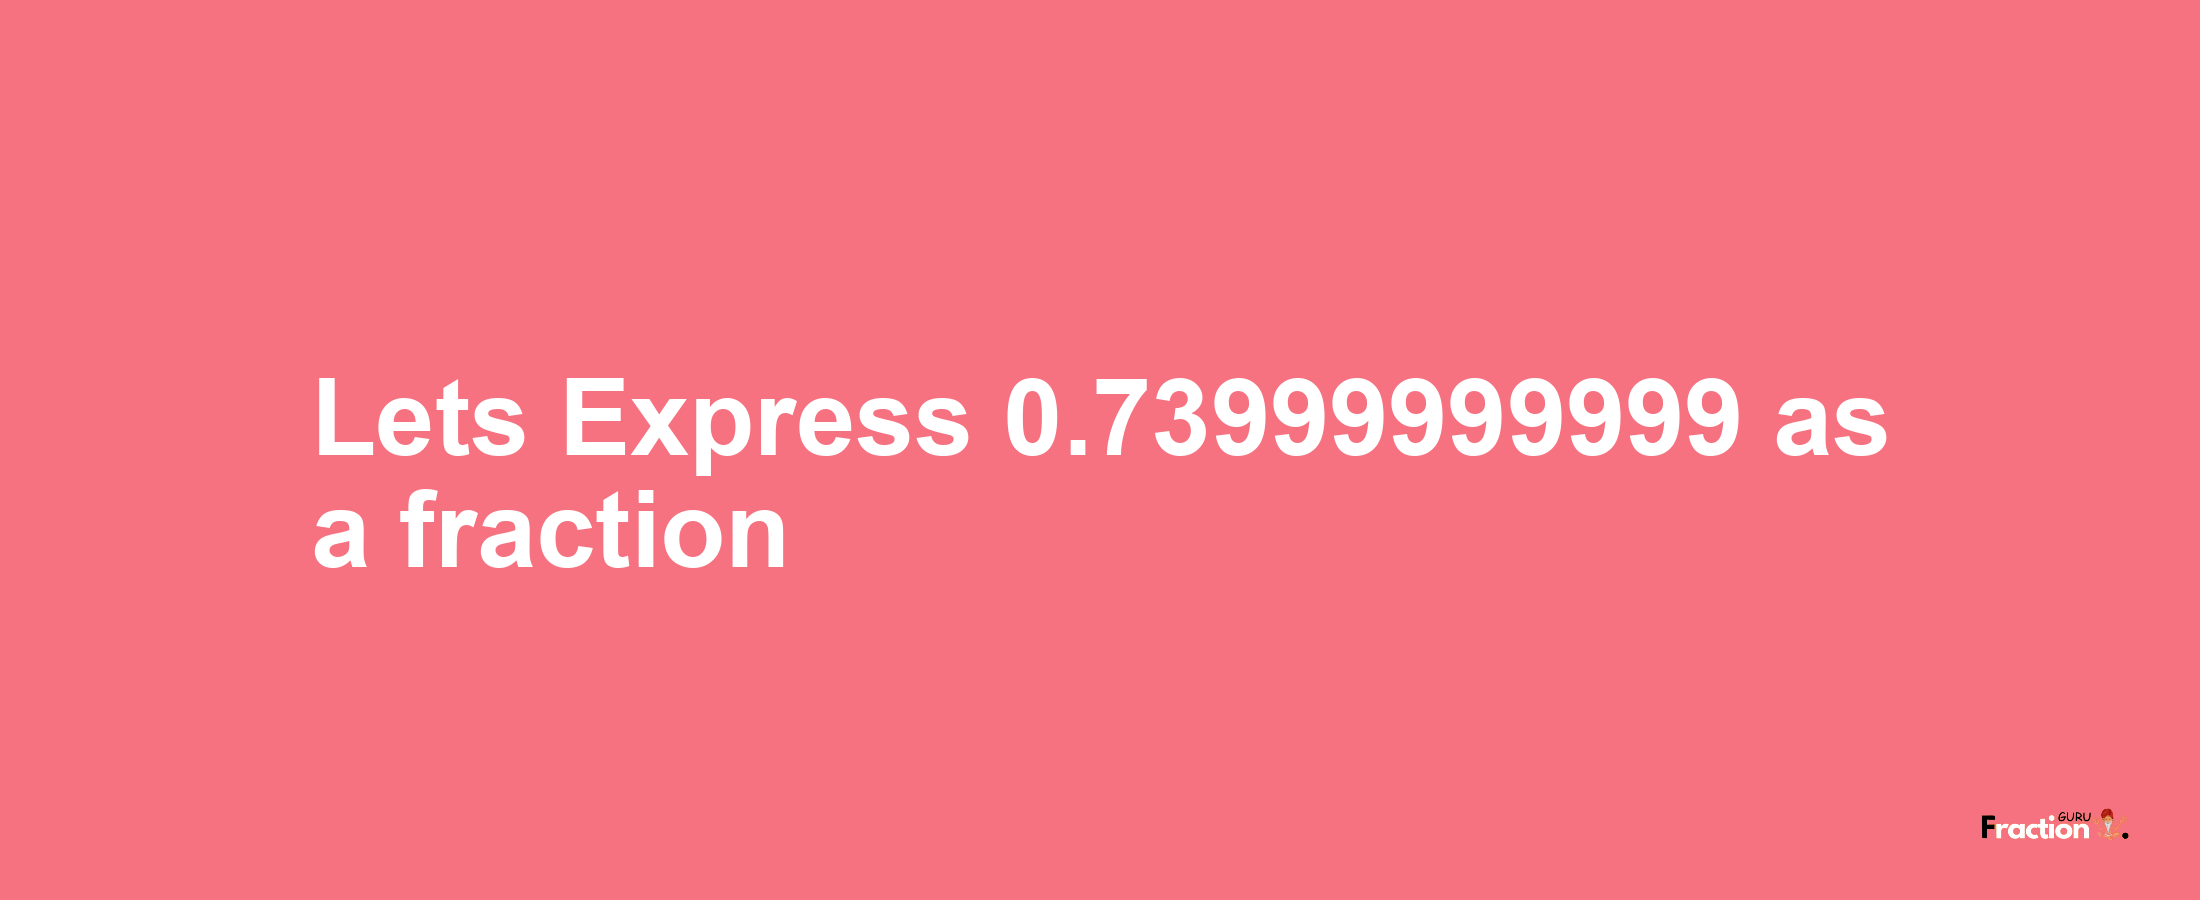 Lets Express 0.73999999999 as afraction